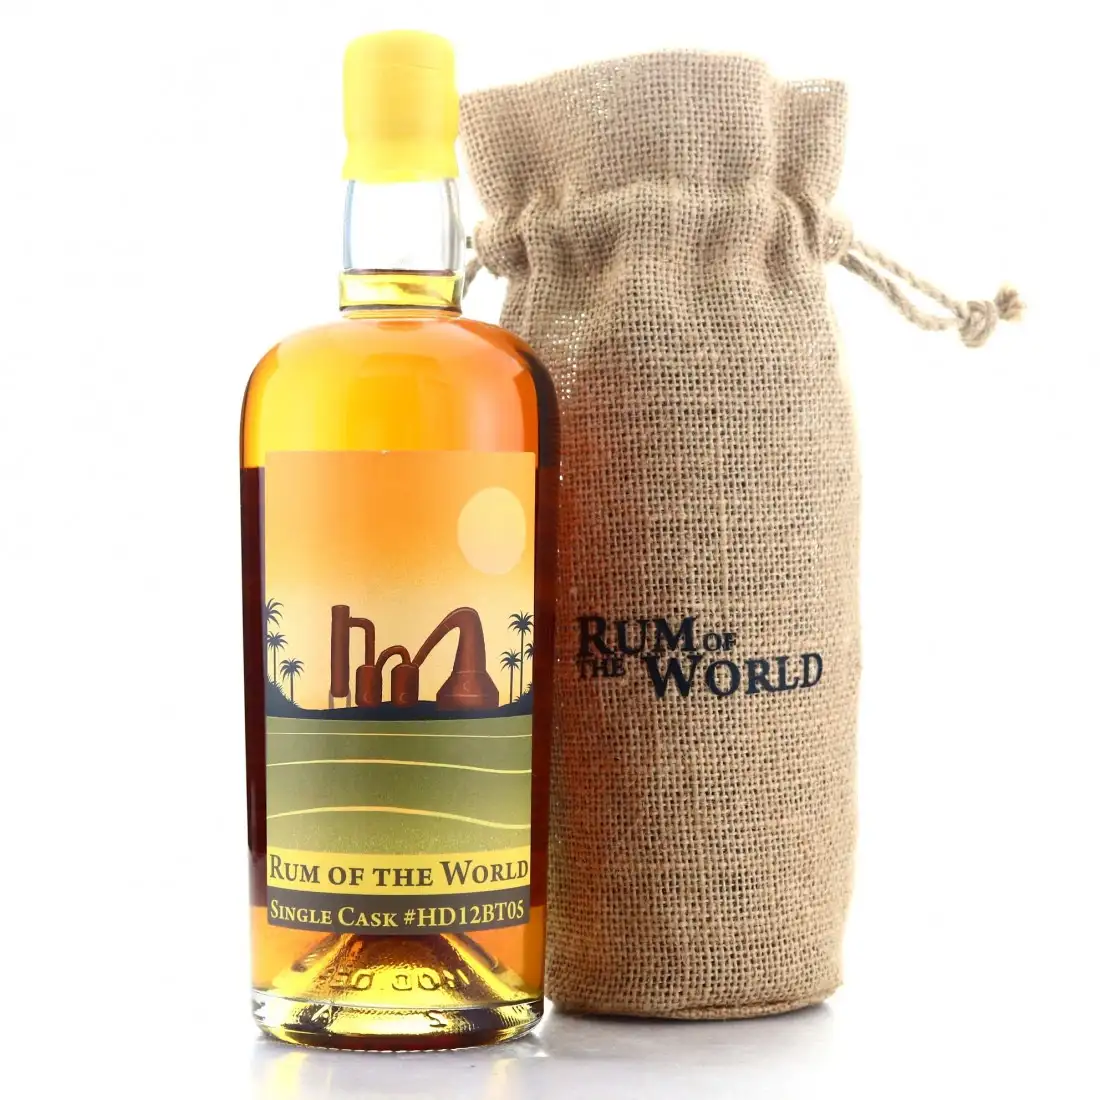 Image of the front of the bottle of the rum Rum of the World OWH